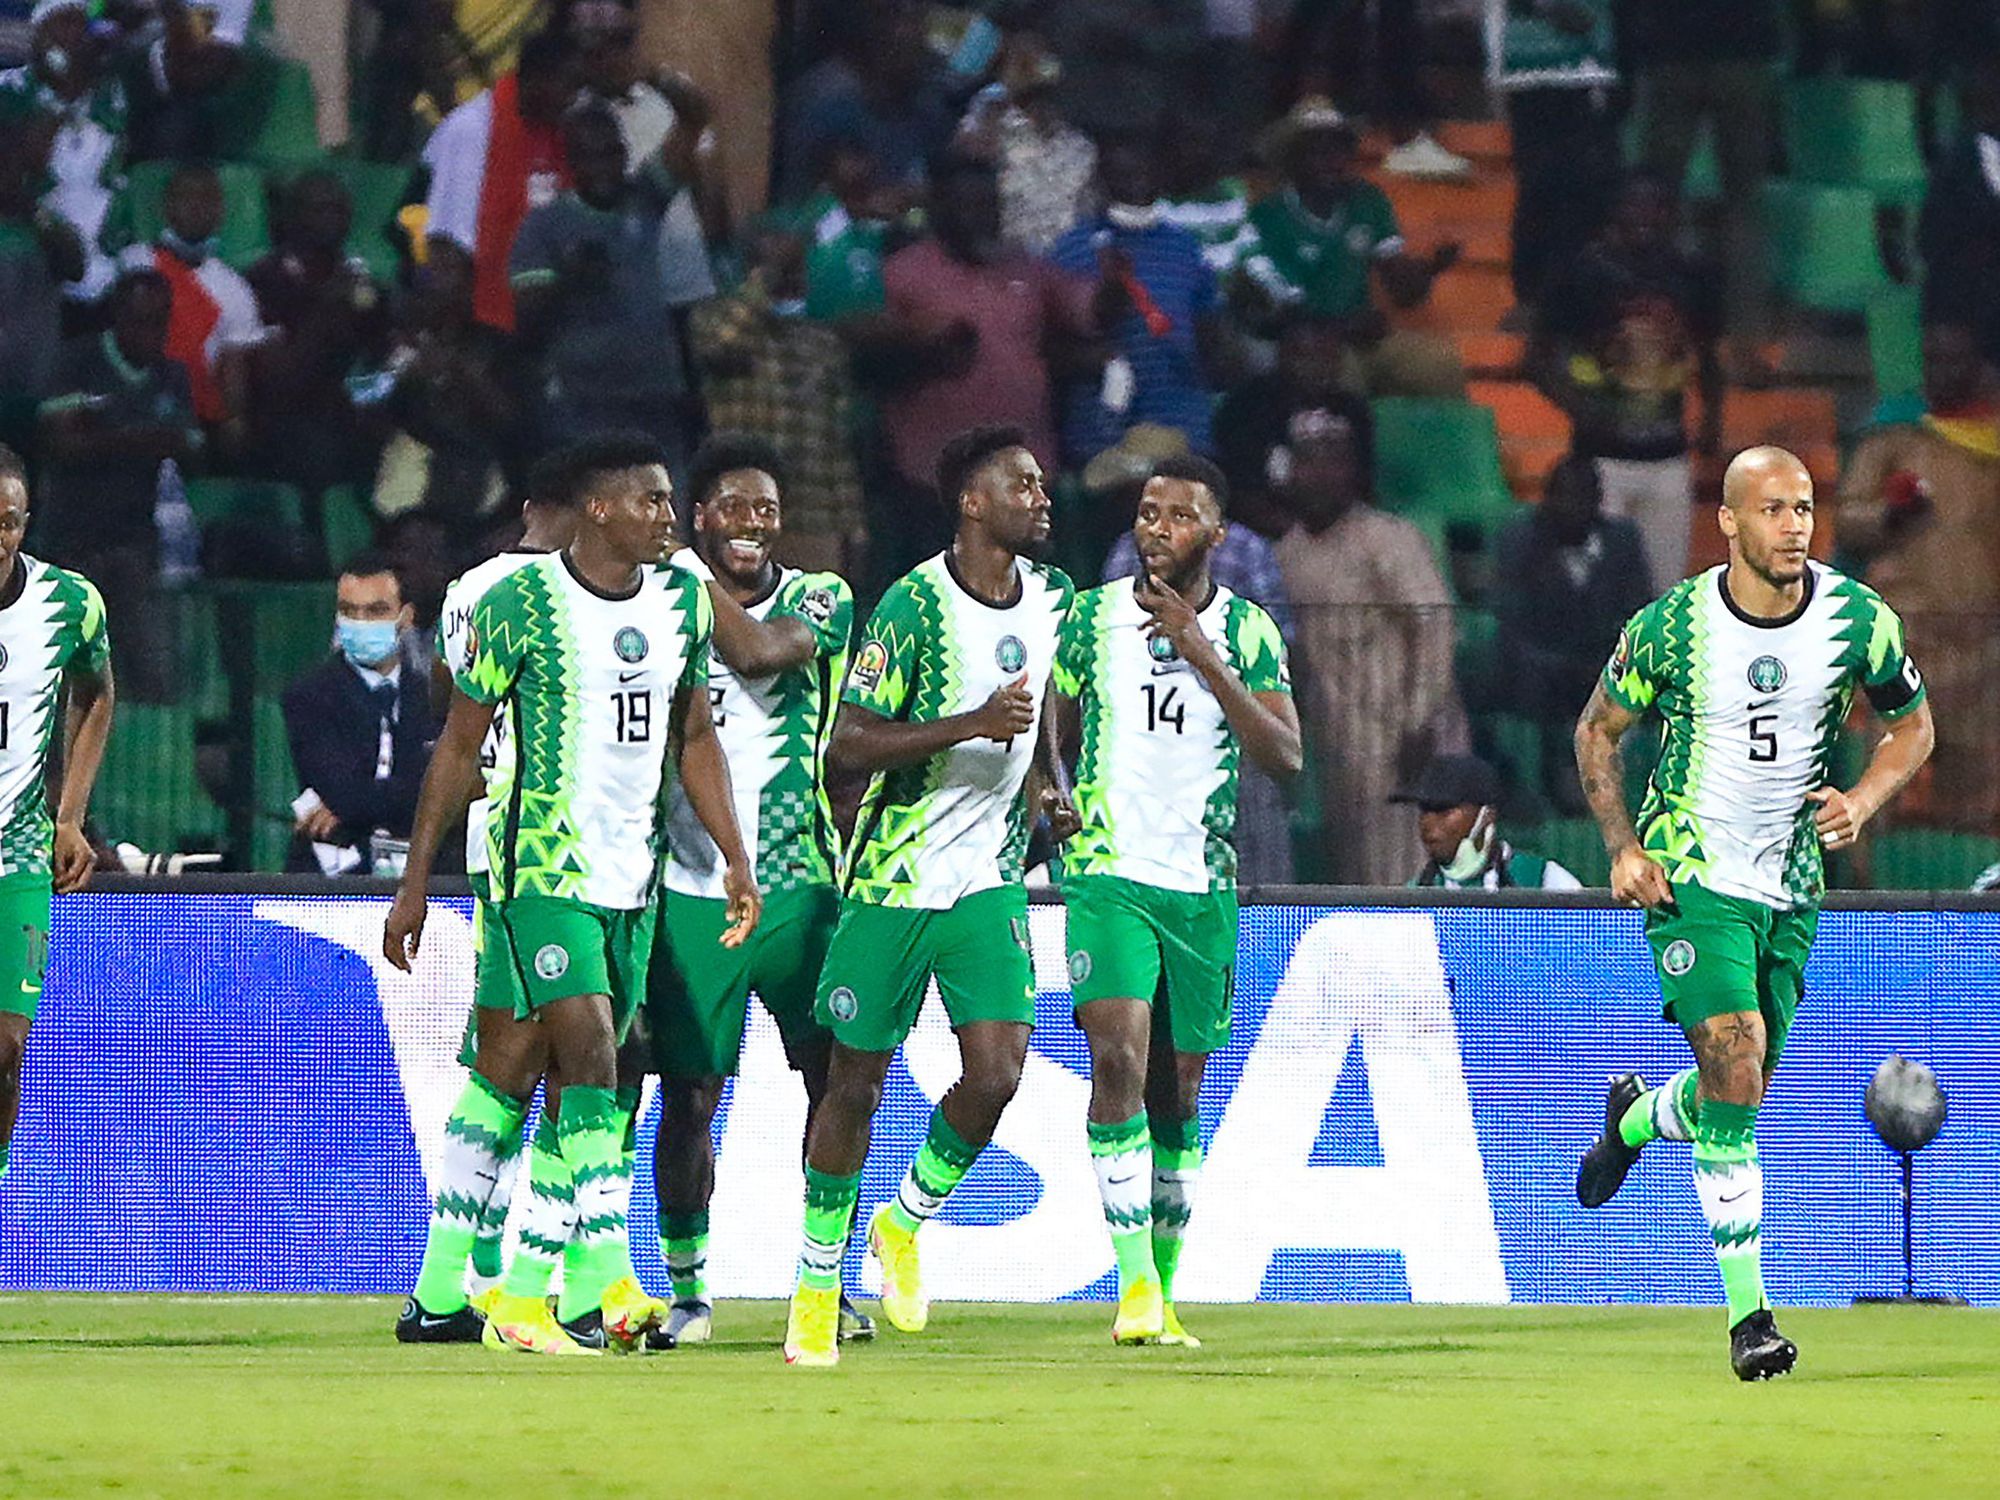 AFCON 2021: Ranking the Best Jerseys at the Tournament